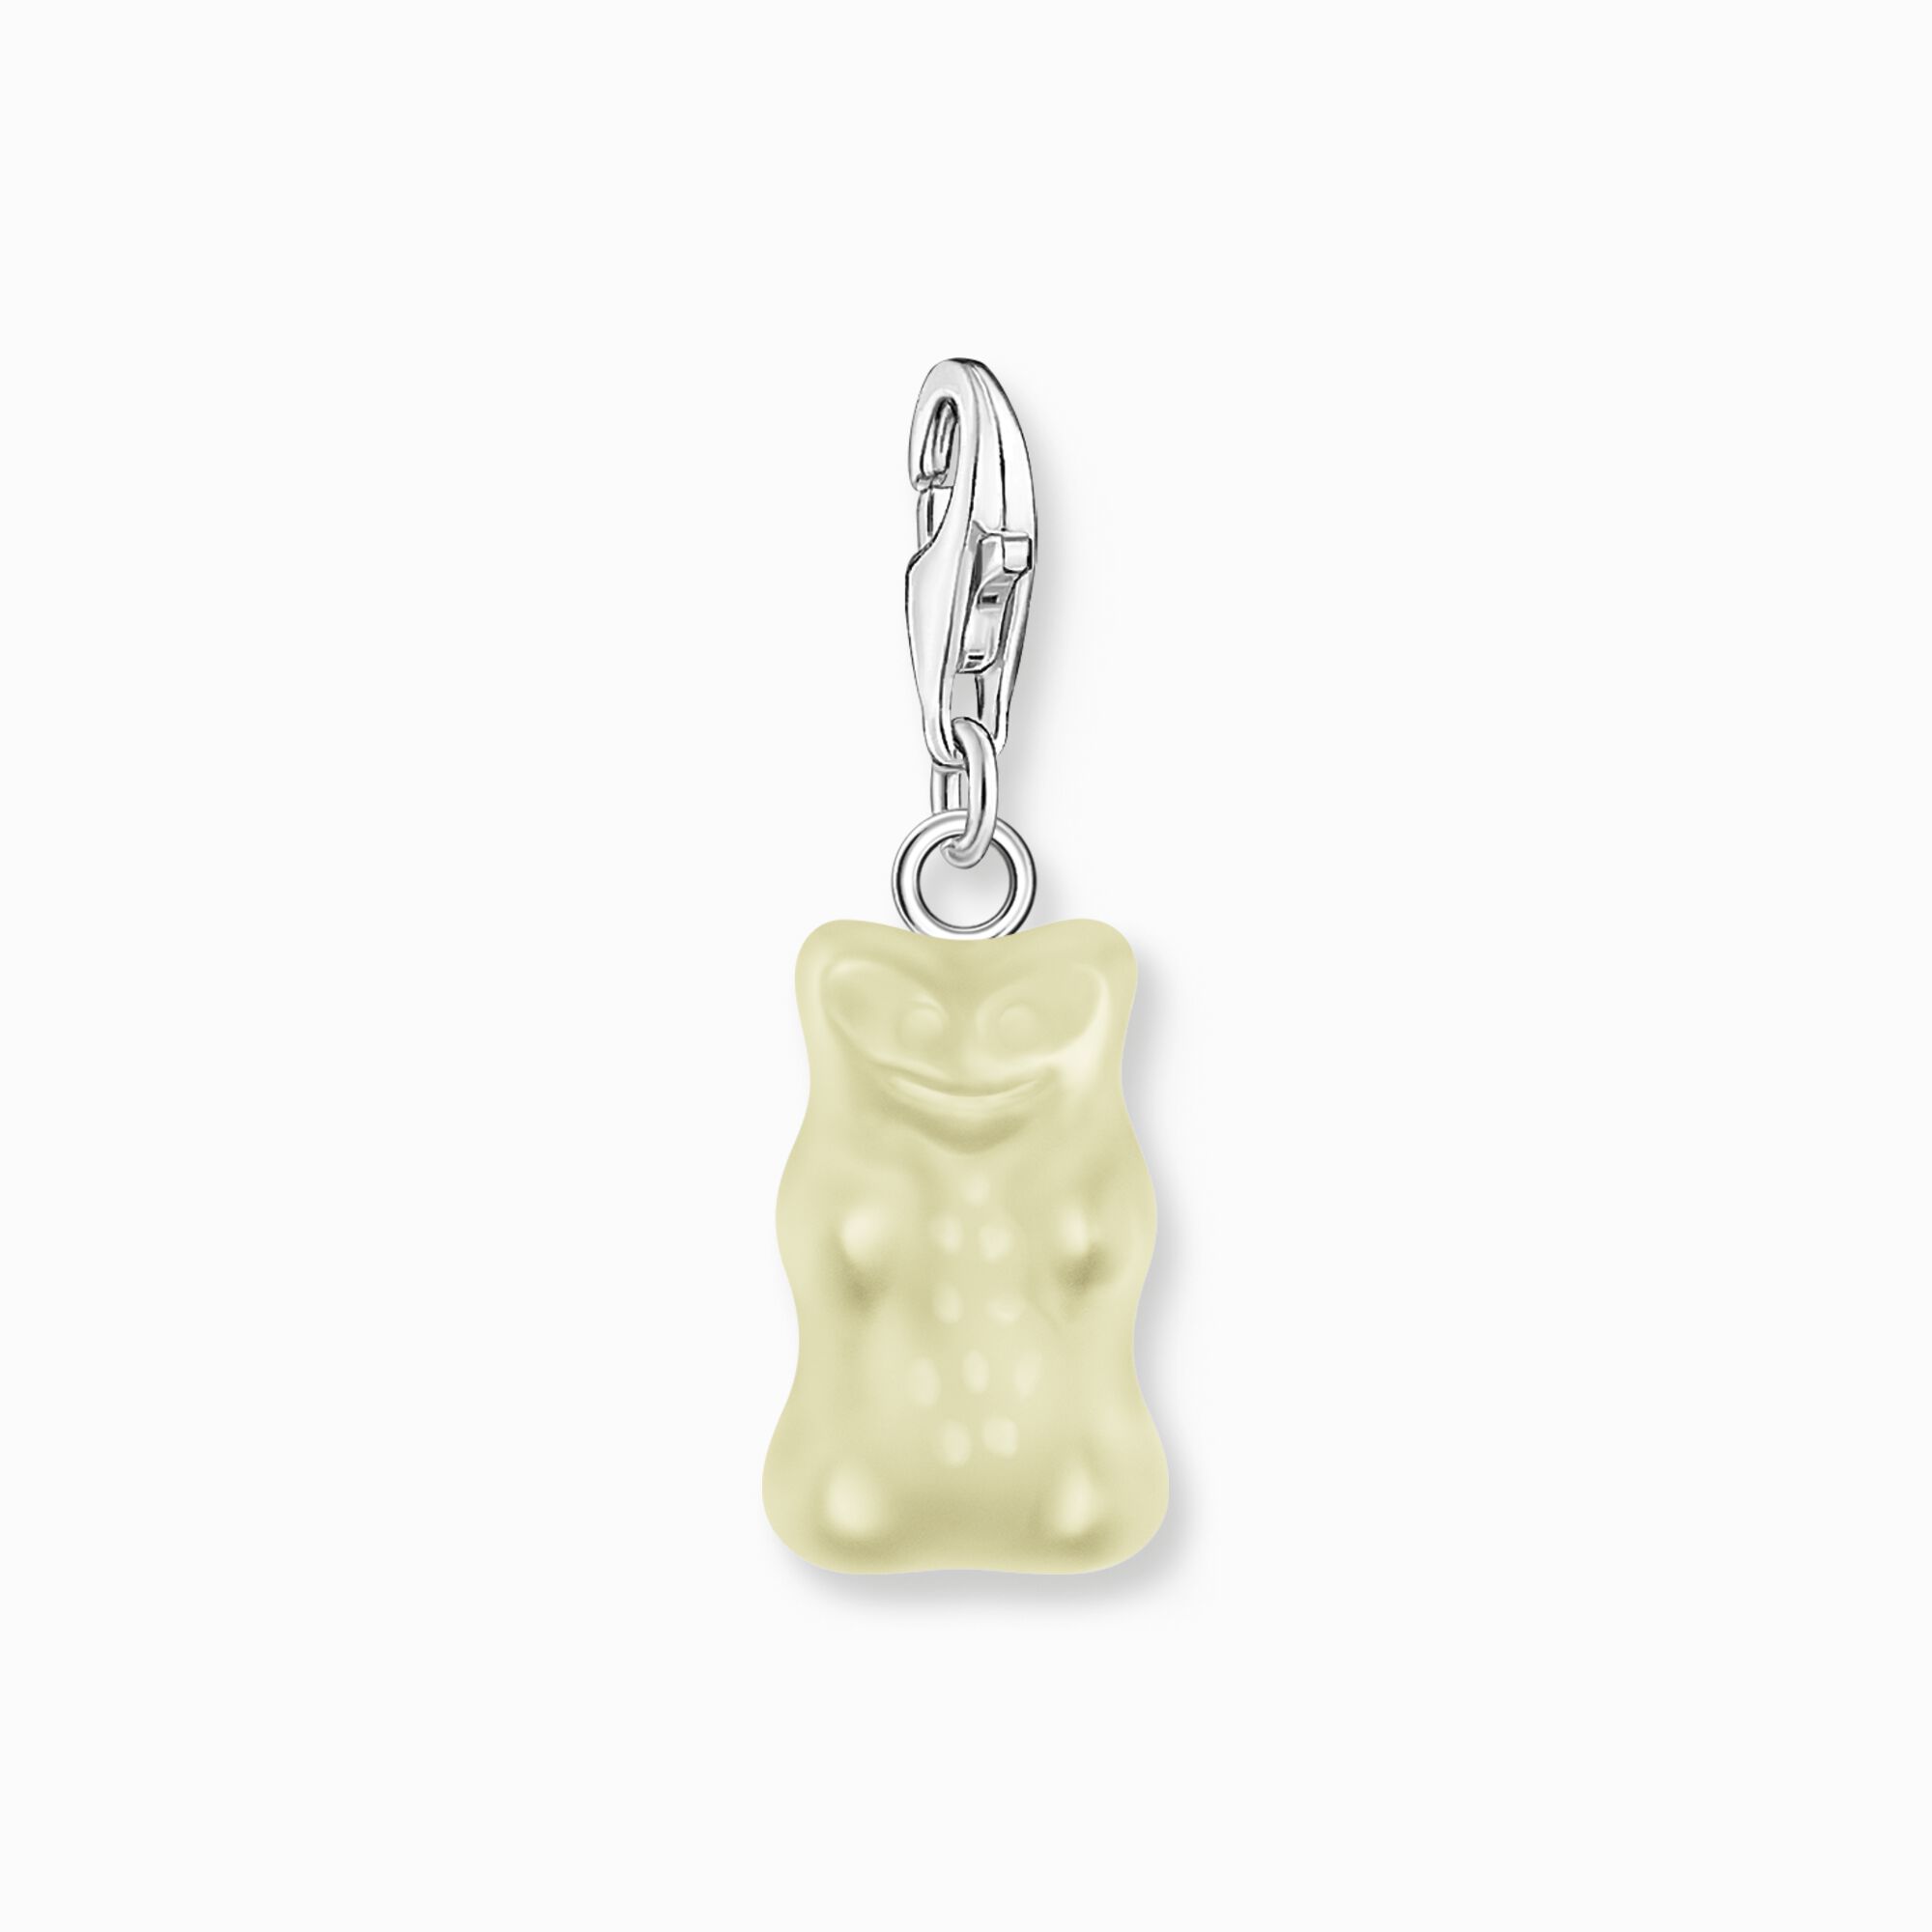 Silver charm pendant goldbears in white from the Charm Club collection in the THOMAS SABO online store